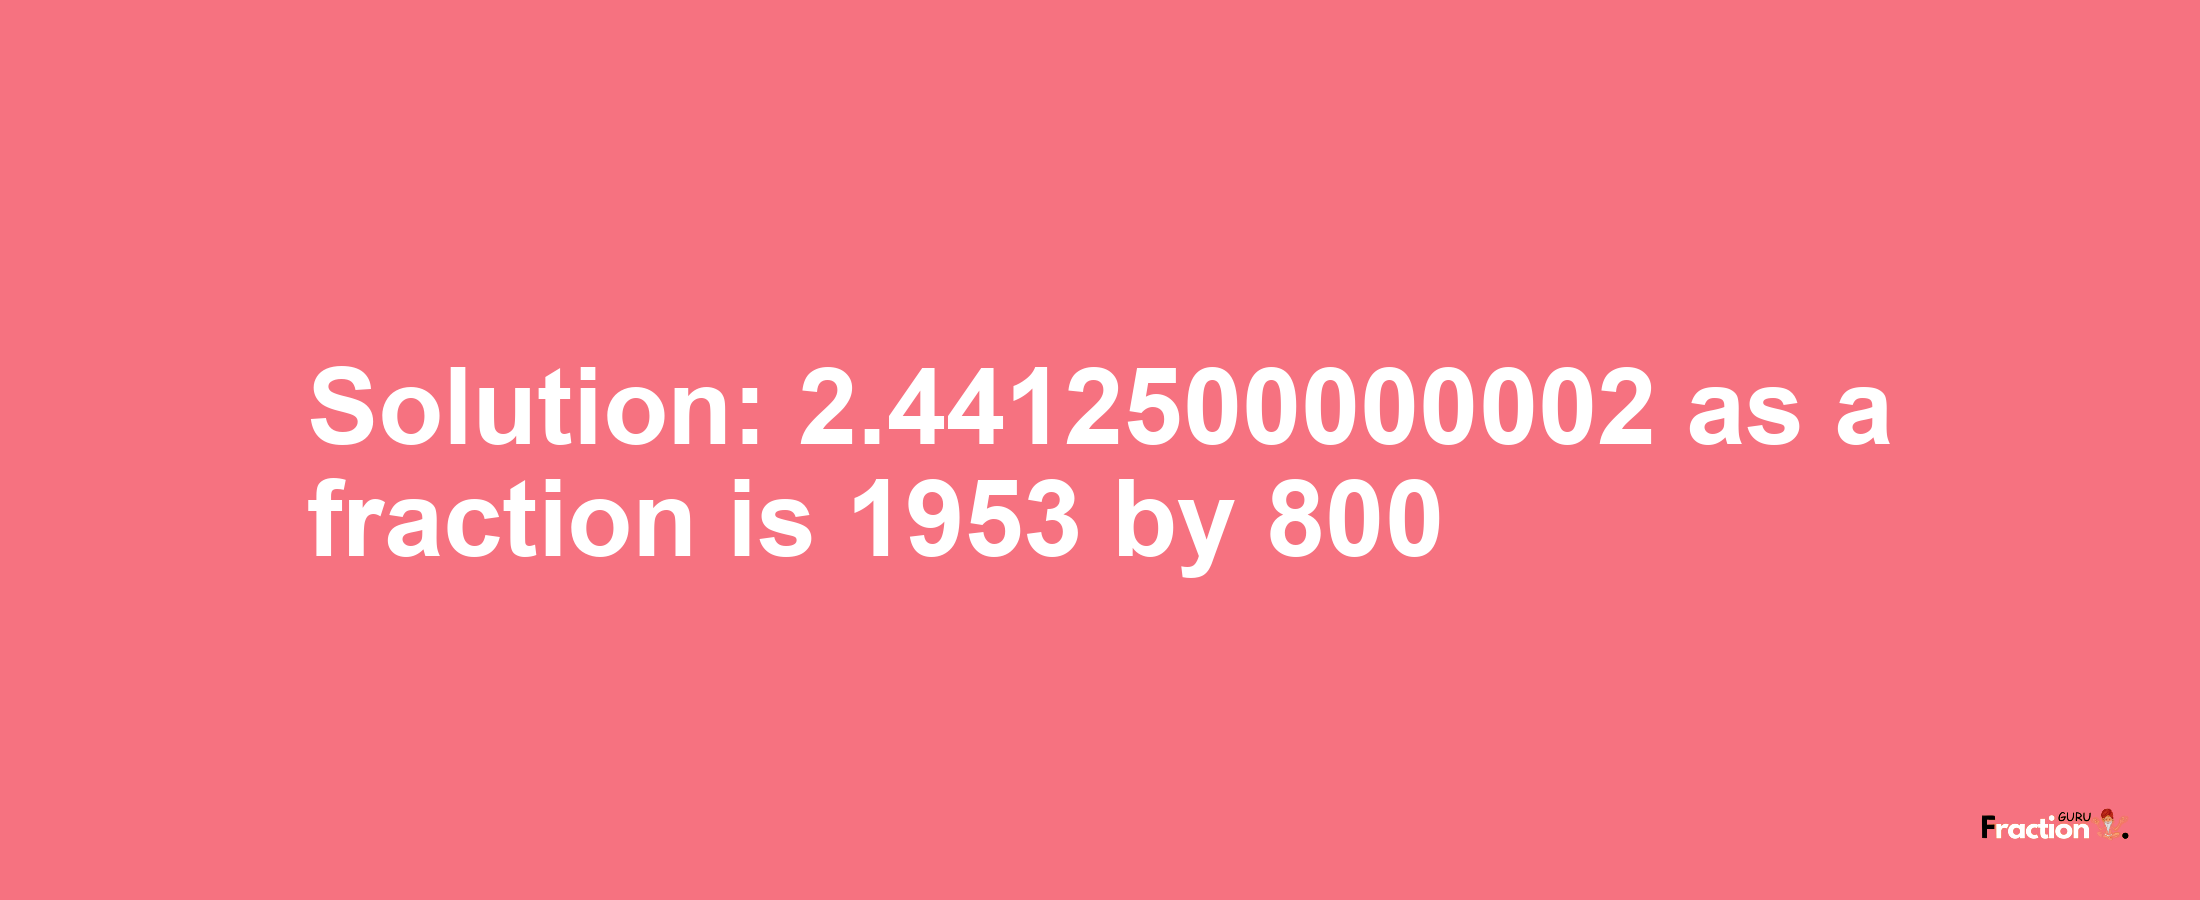 Solution:2.4412500000002 as a fraction is 1953/800